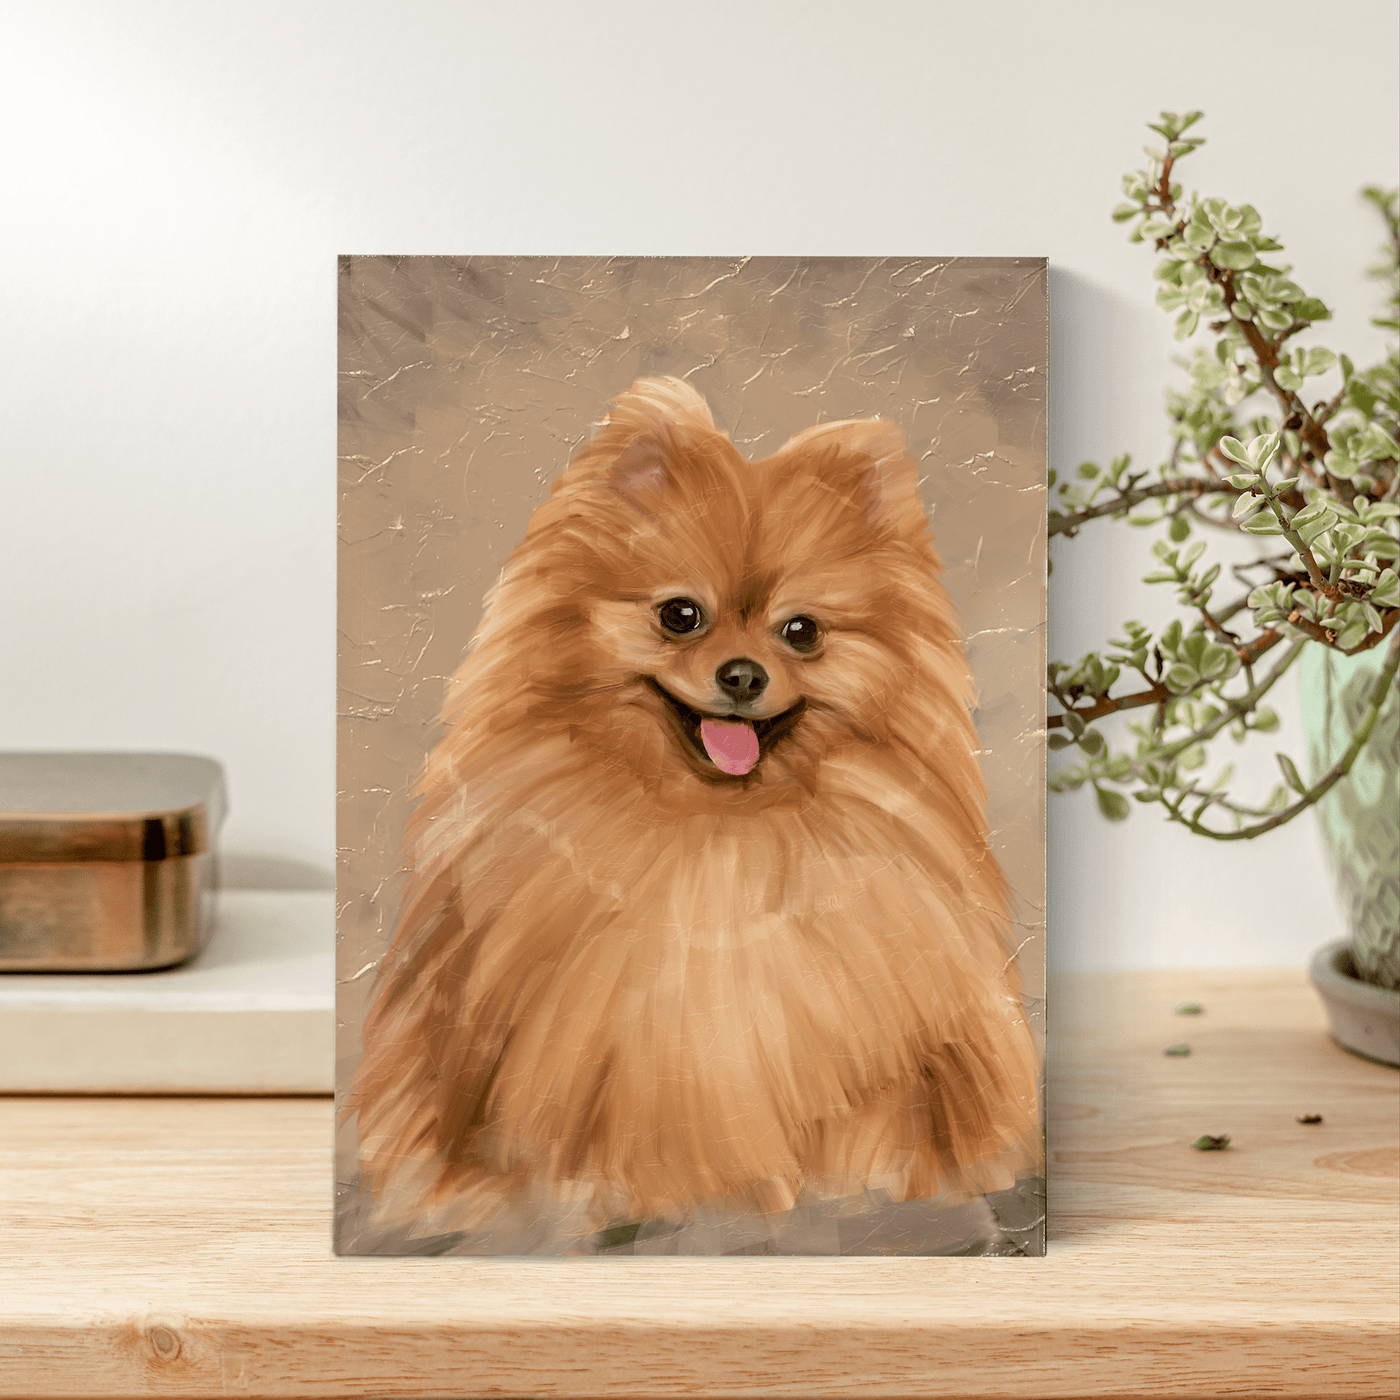 acrylic dog painting of a a smal hairy breed dog with orange tones